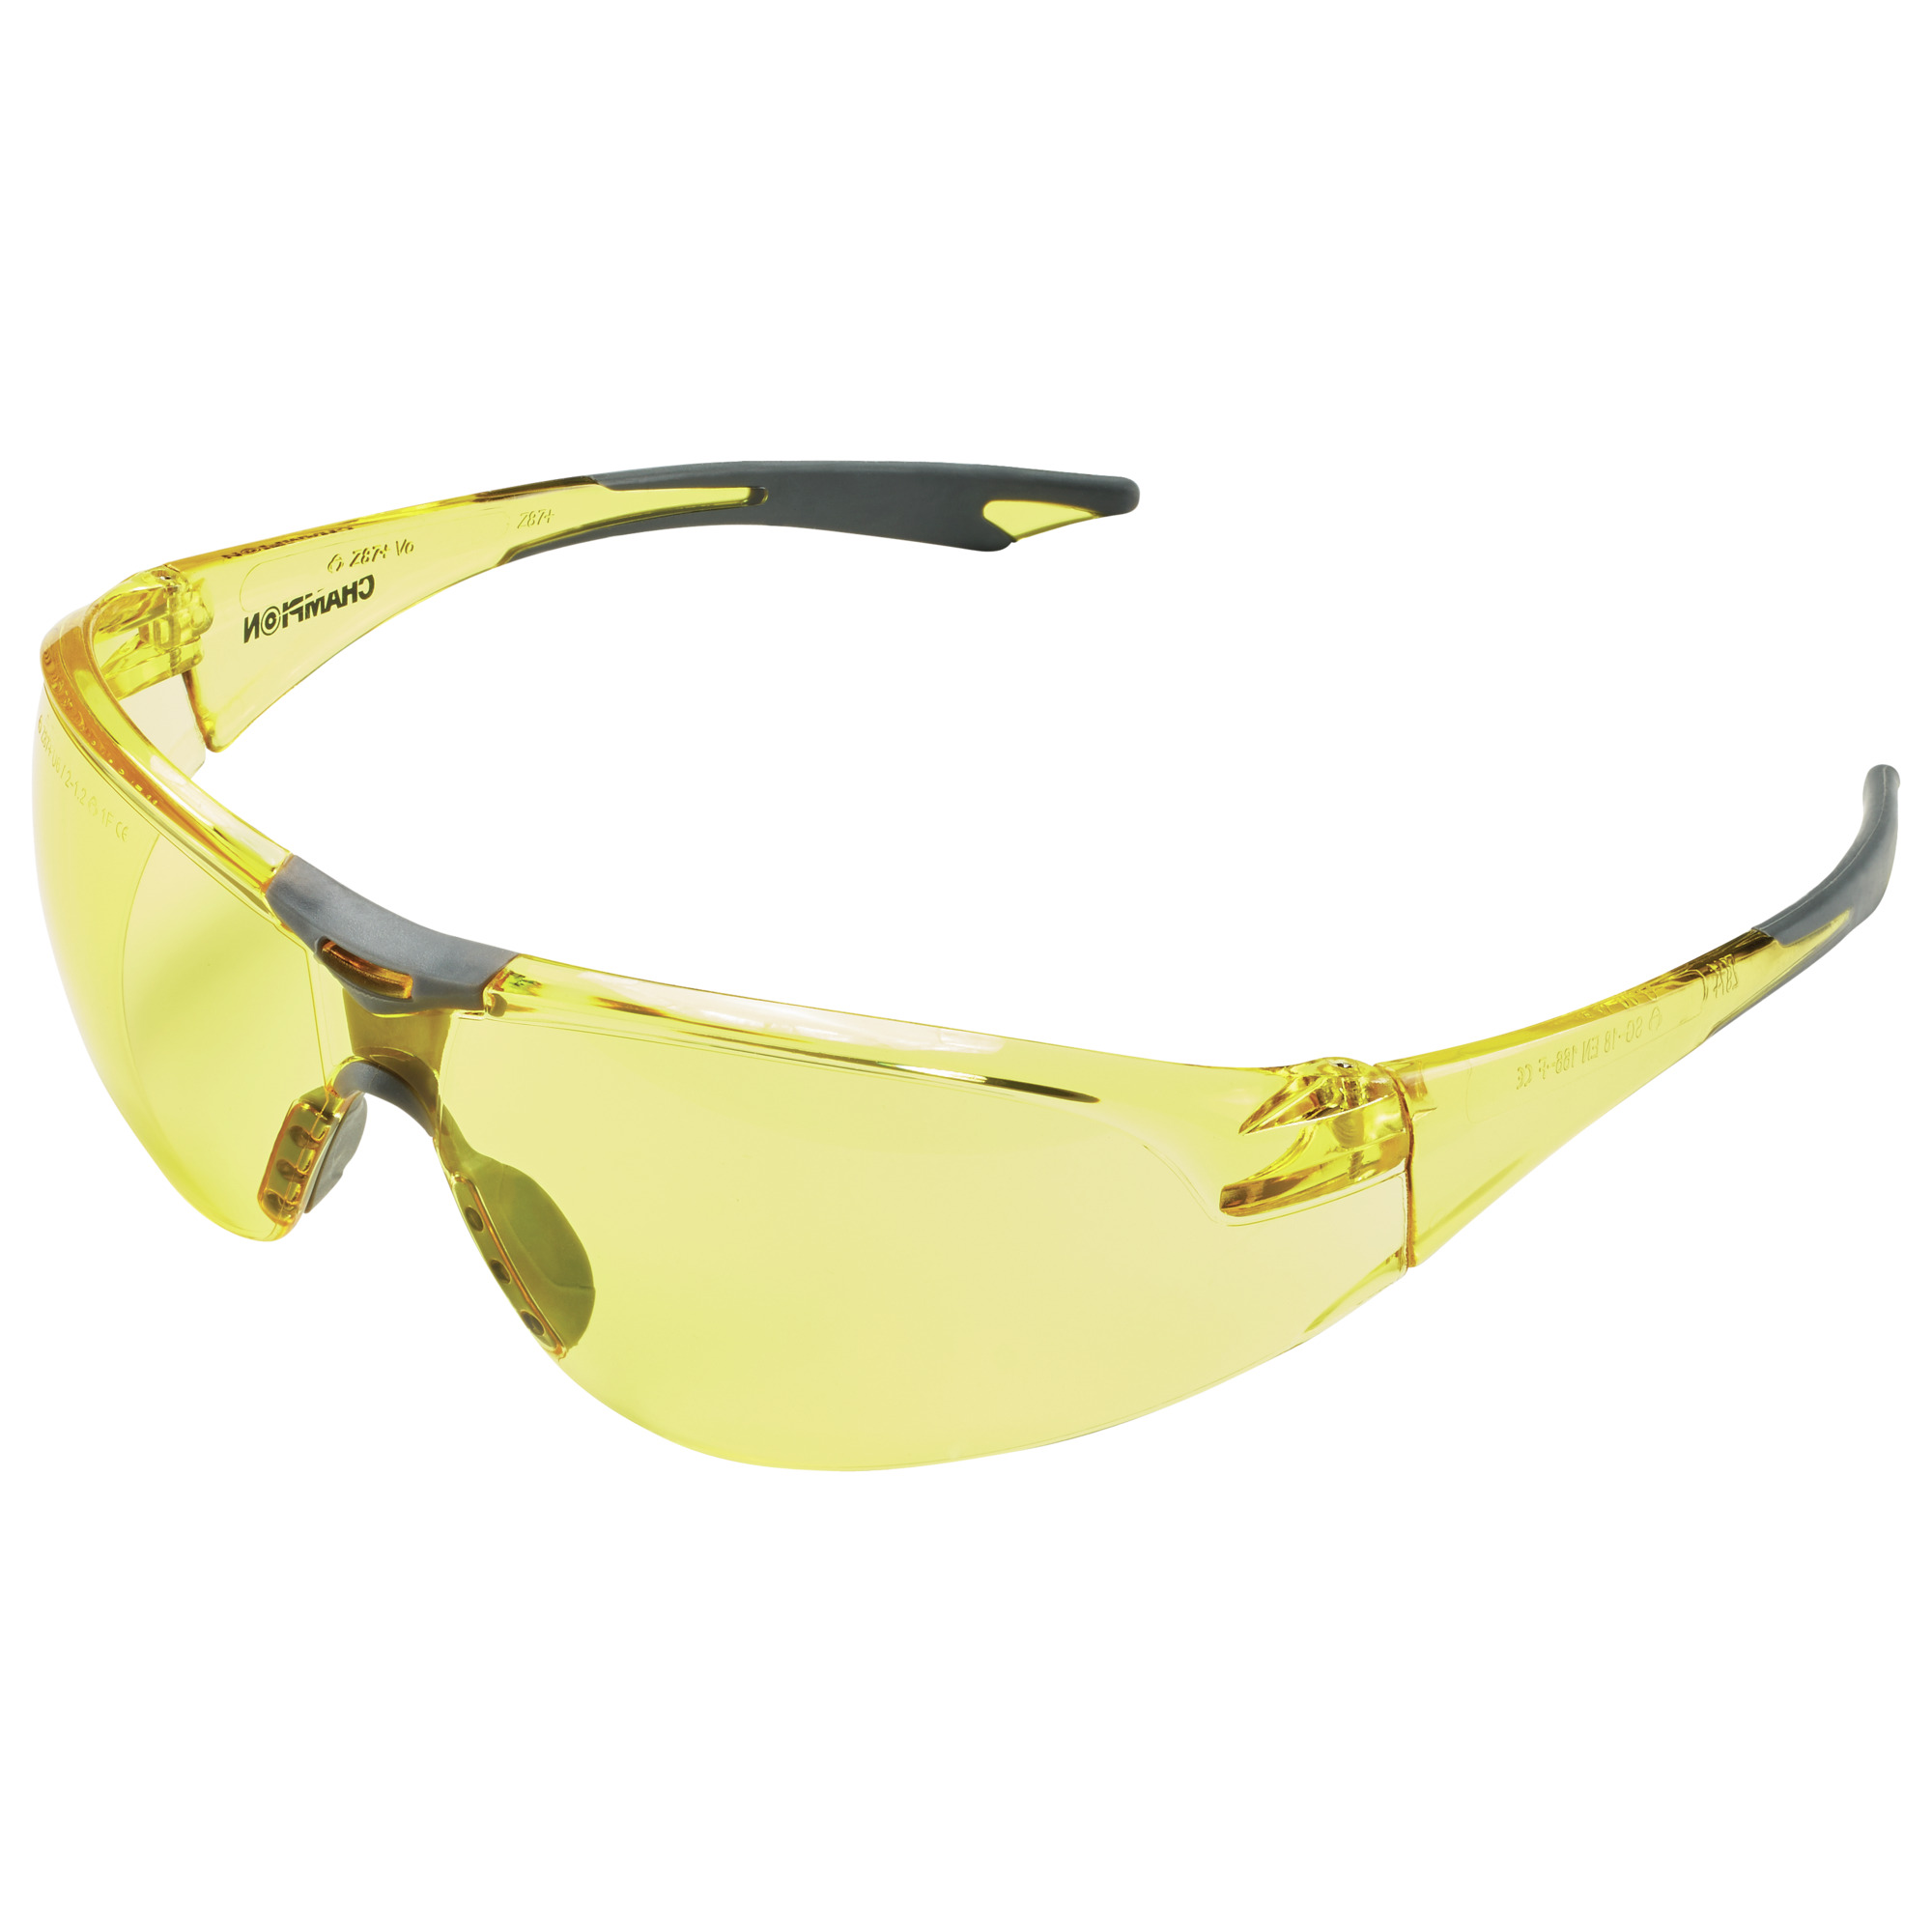 Buy Amber Ballistic Shooting Glasses Open Frame and More Champion Target